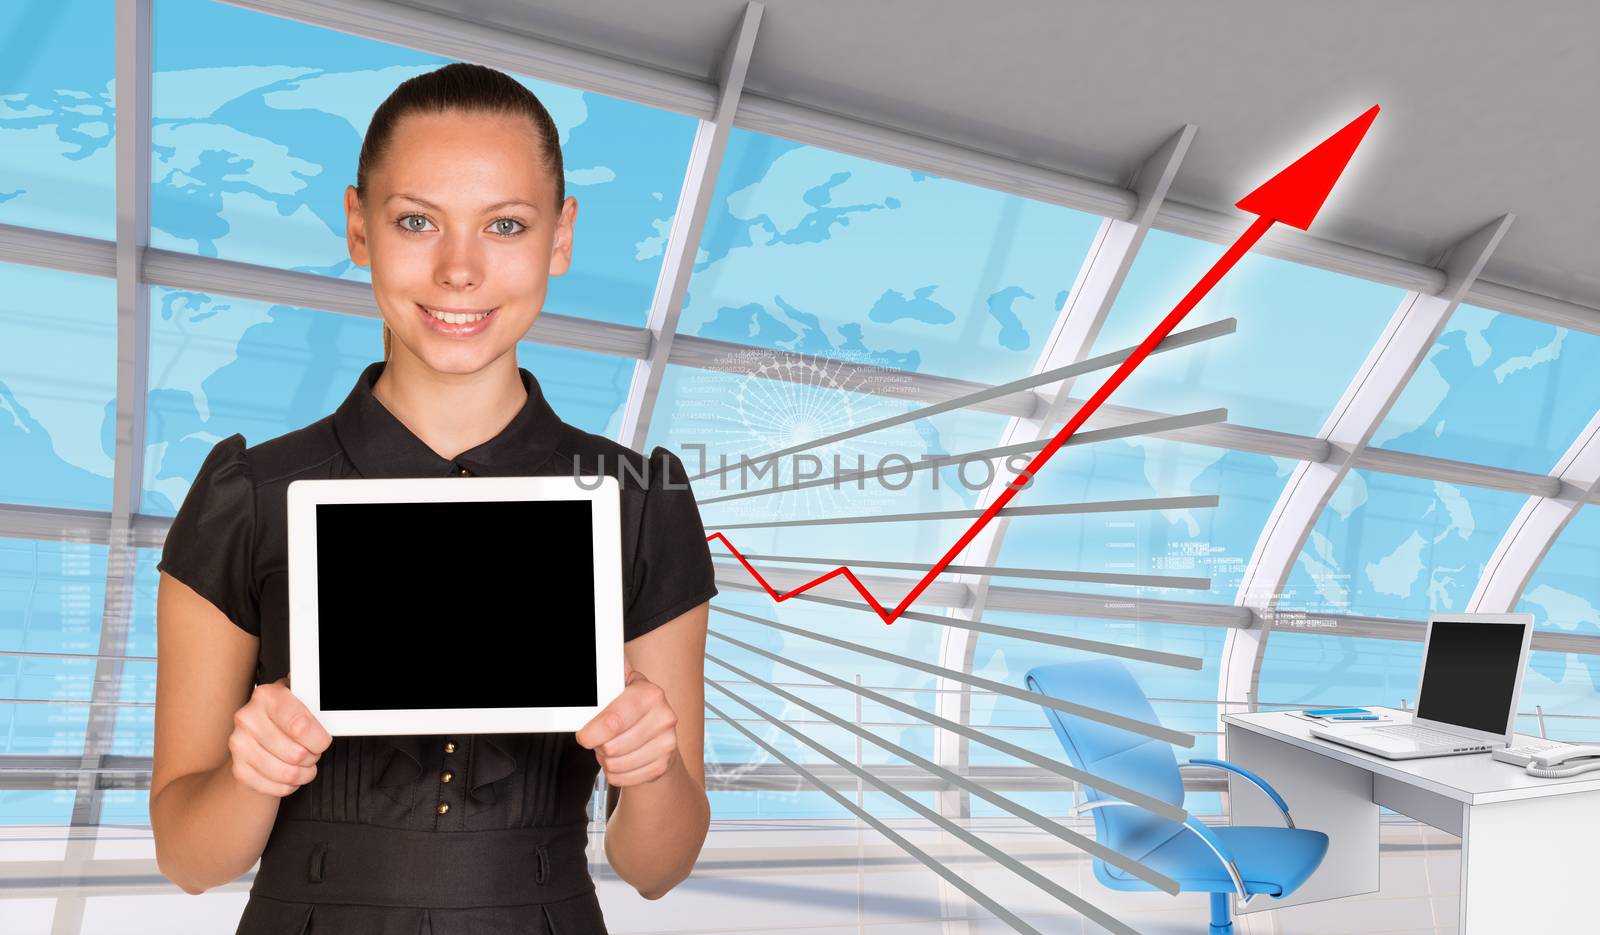 Businesslady in business center and blue sky with clouds background, interior view